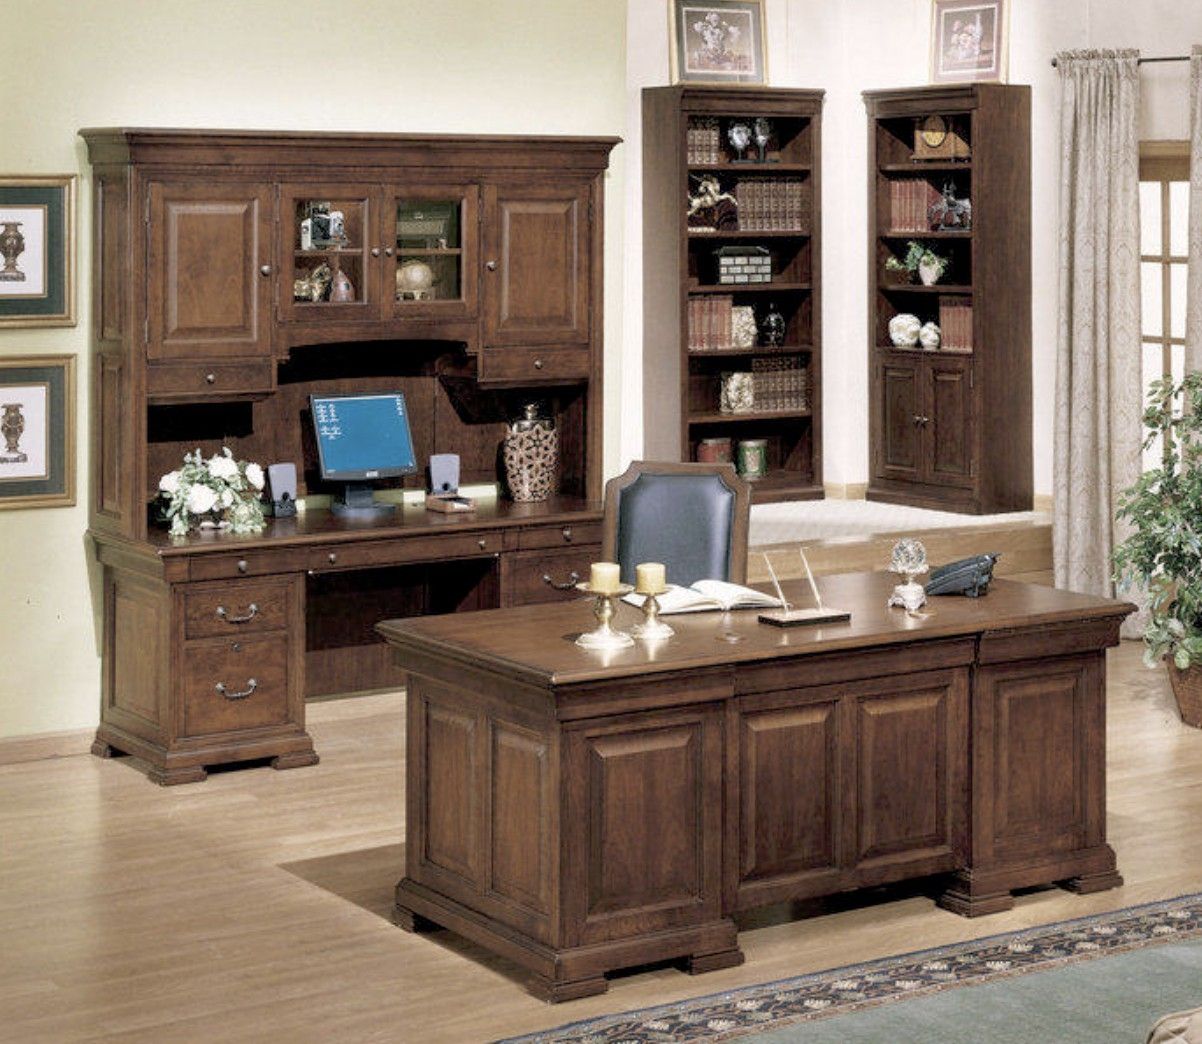 Executive Desk And Credenza – Ideas On Foter In Office Desks With Filing Credenza (View 1 of 15)